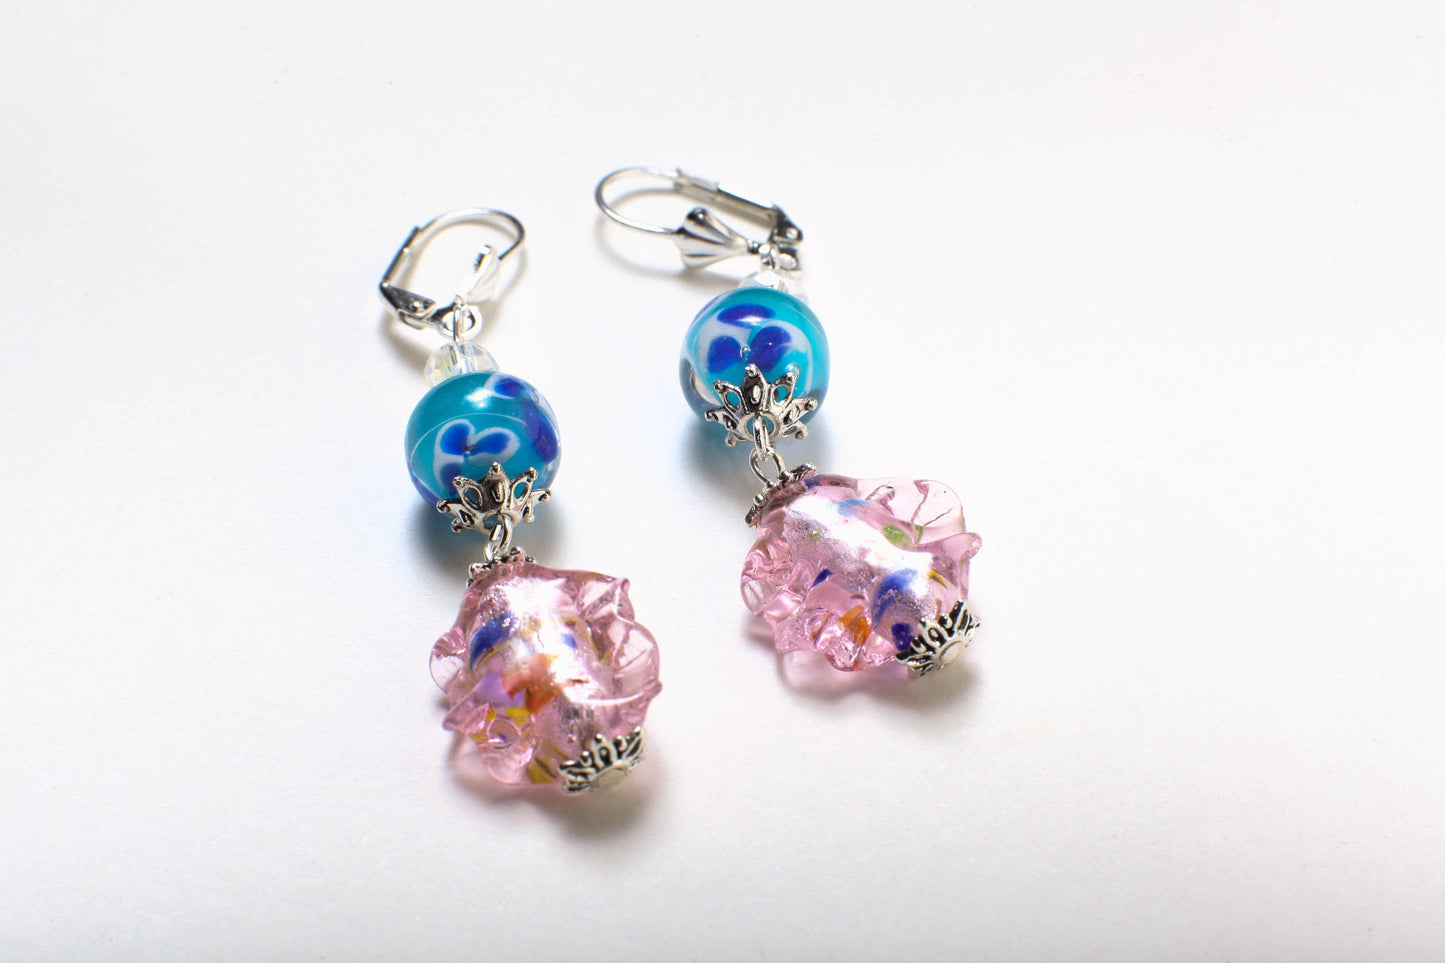 Glass Lamp work Pink Leaf Wave Bead 17x19mm Dangling with Blue Lamp Work Round Czech Glass Foil Bead Silver Earrings, Handmade Gift for Her